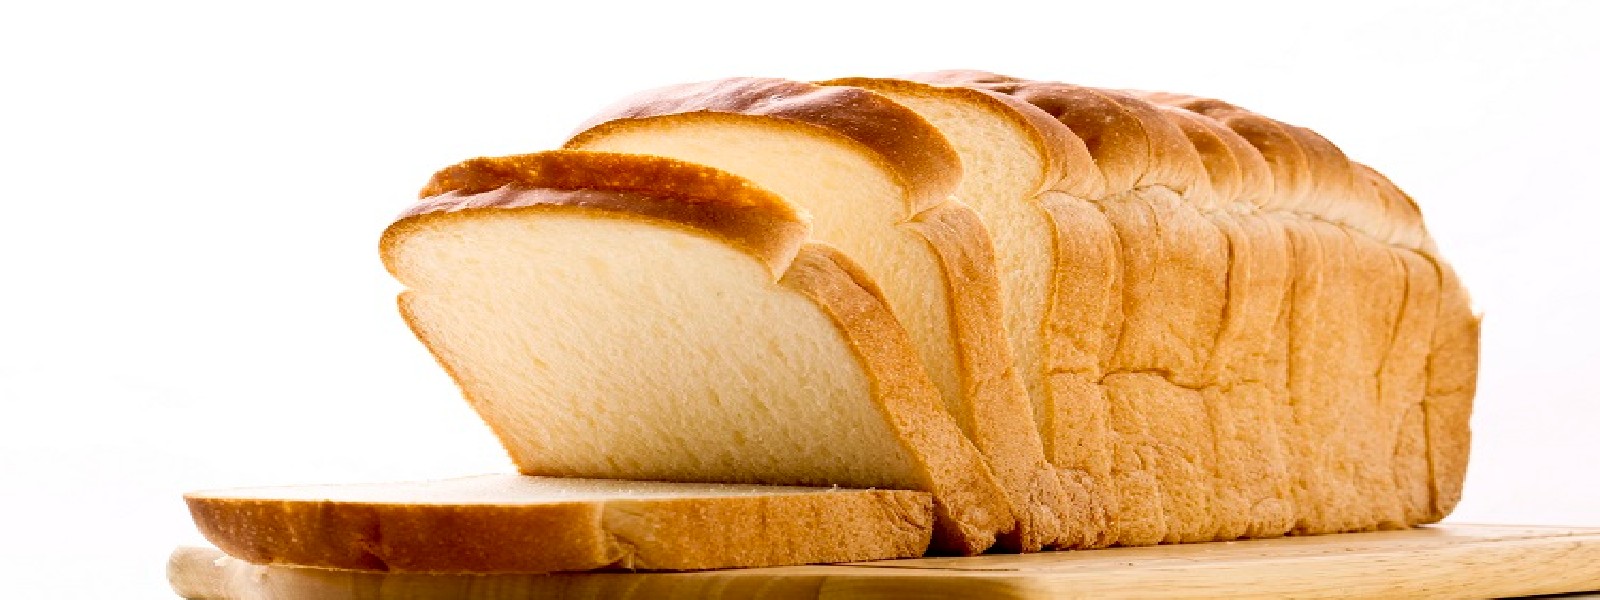 Prices of Bread and Bakery products increased